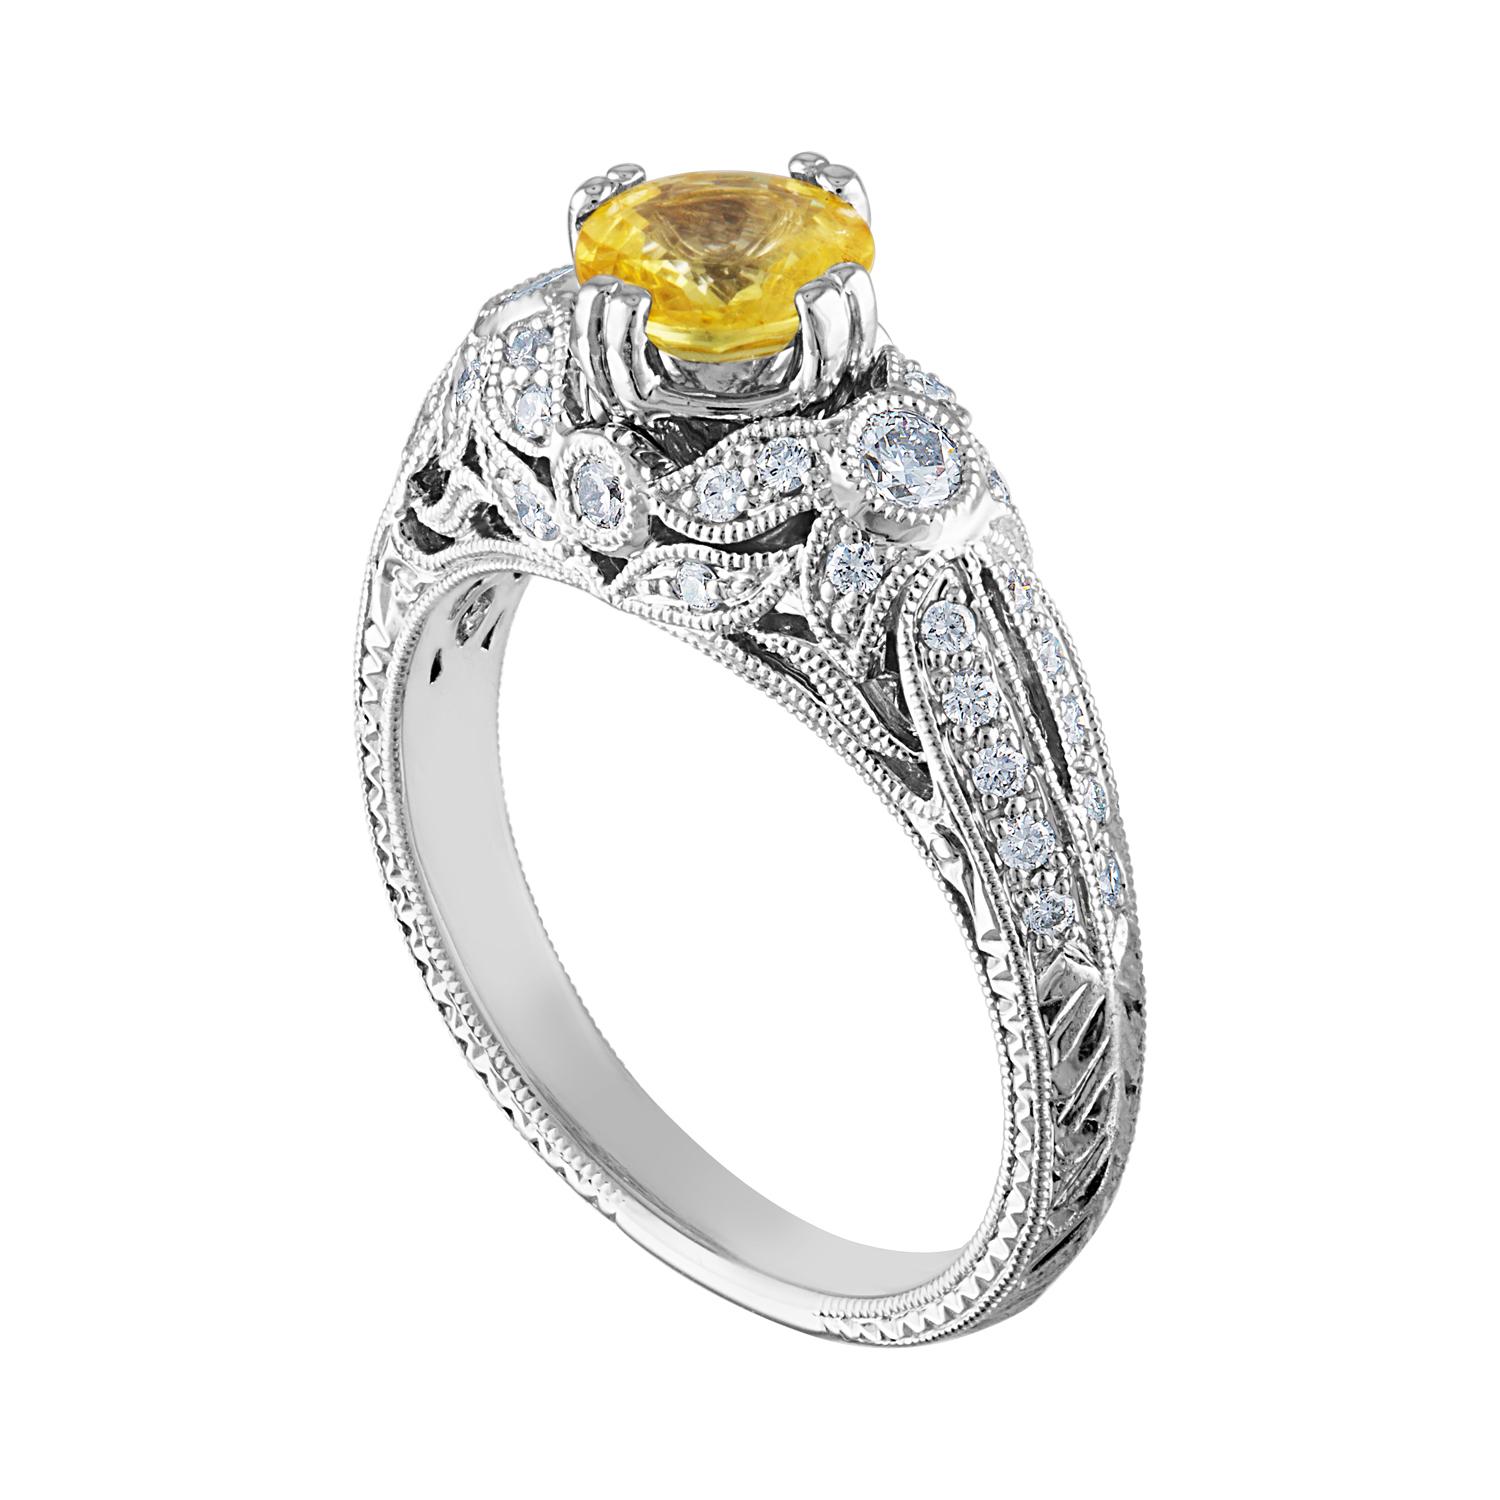 Beautiful Art Deco Revival Round Milgrain Filigree Ring
The ring is 18K White Gold
The Center Stone is a Round Yellow Sapphire 0.97 Carats
The Sapphire is AGL Certified Heated
There are 0.45 Carats in Diamonds F/G VS/SI
The ring is a size 6.75,